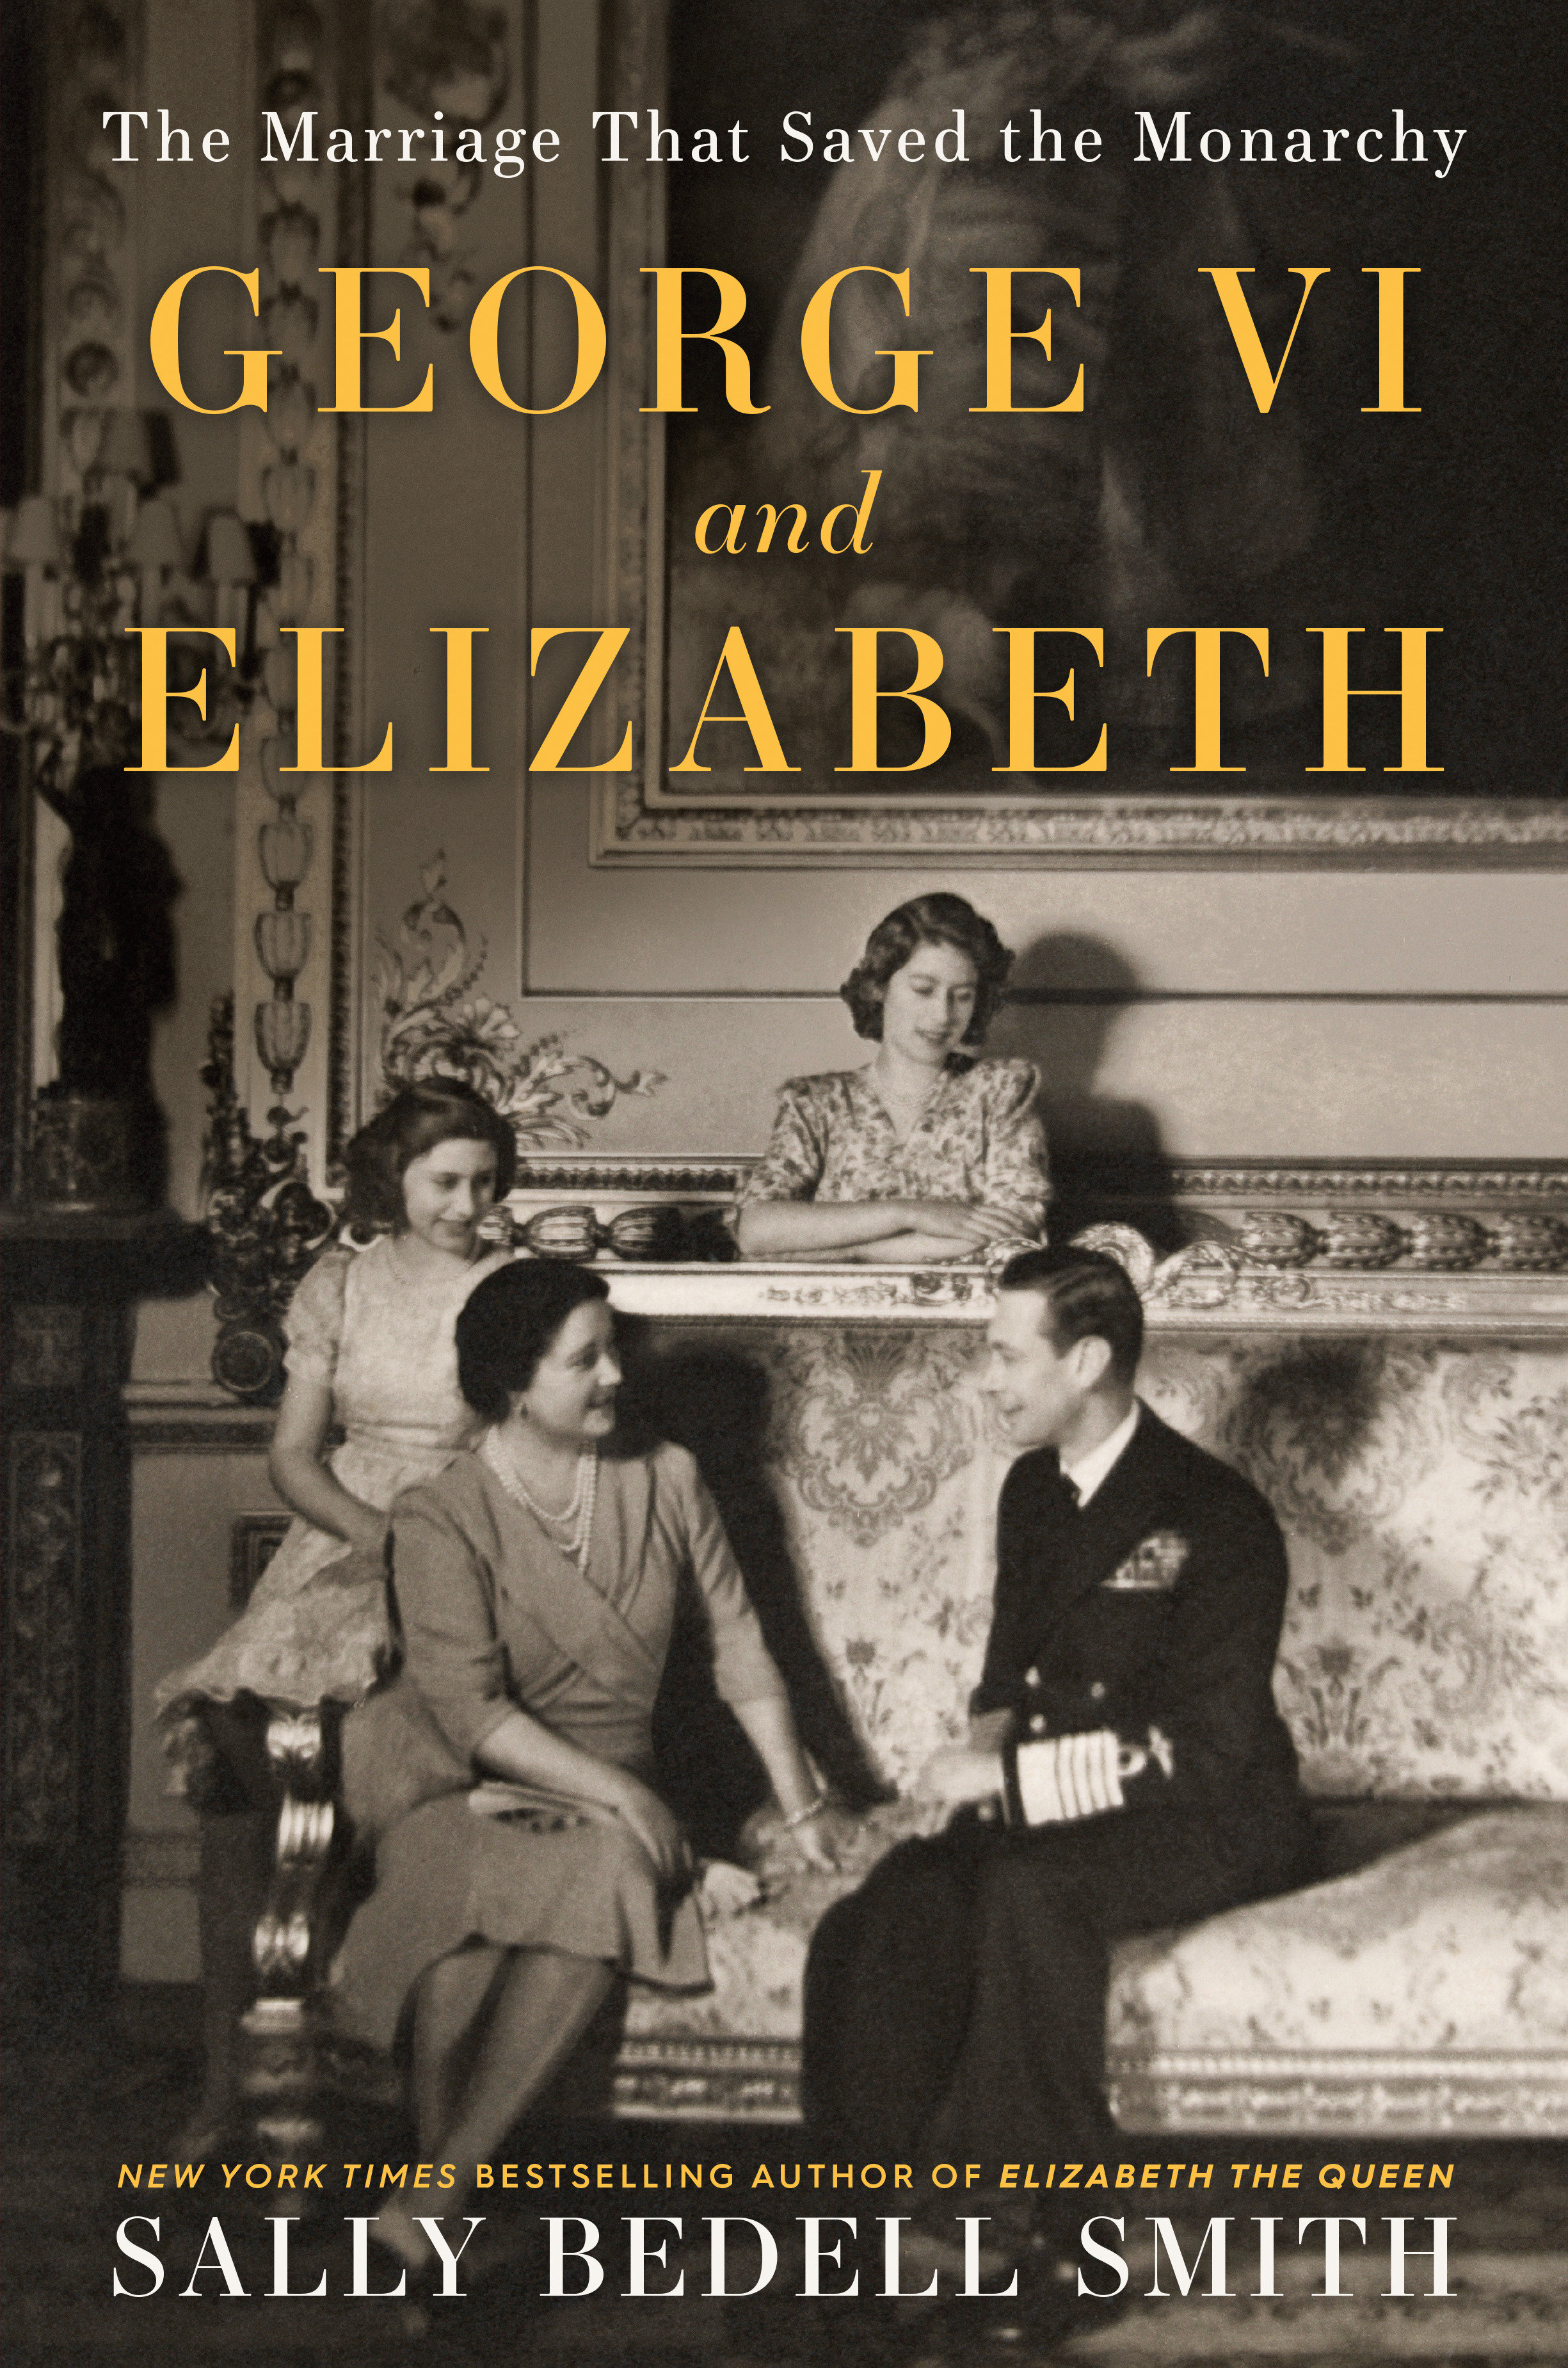 George VI and Elizabeth The Marriage That Saved the Monarchy cover image